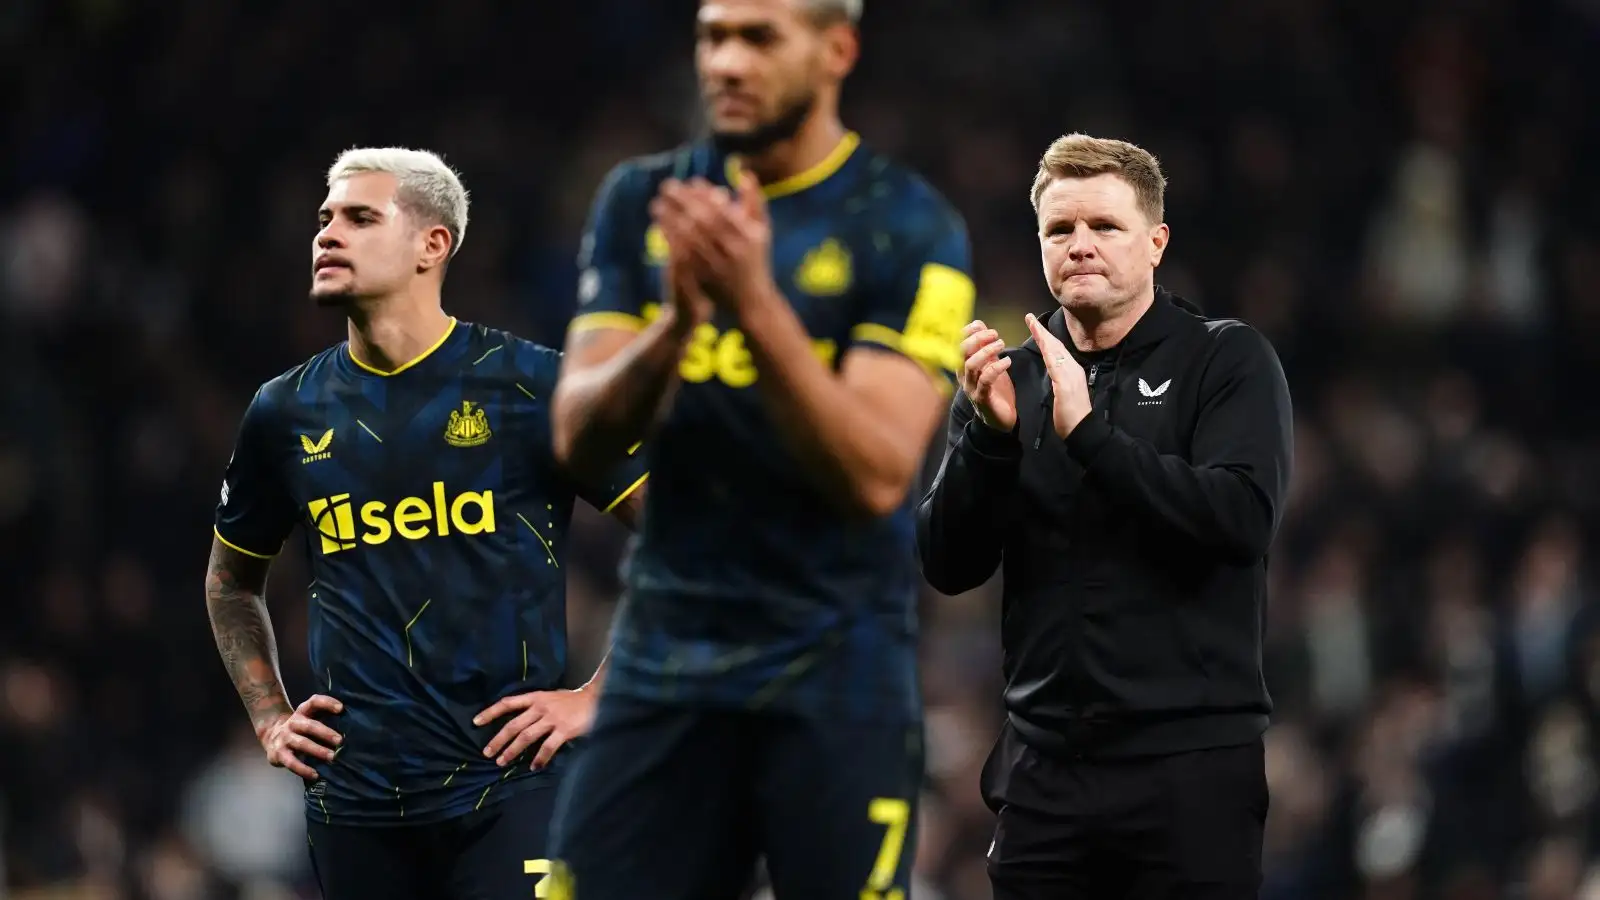 Newcastle Joined head master Eddie Howe praises the adherents after a loss.